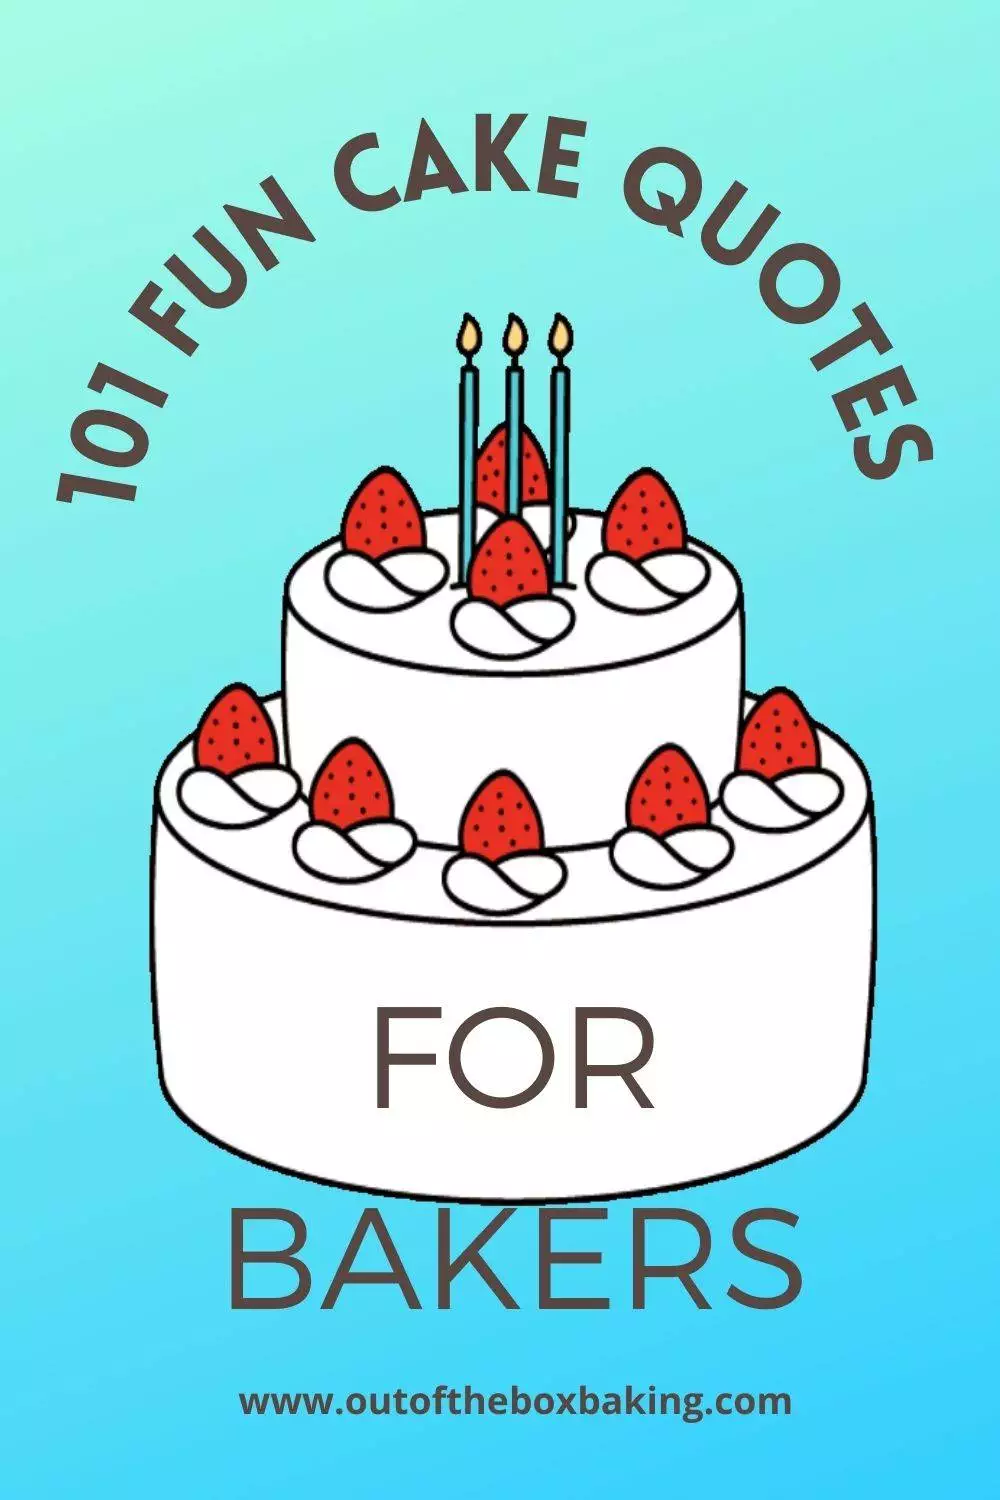 101 Fun Cake Quotes for Bakers to use in 2023 - Out of the Box Baking